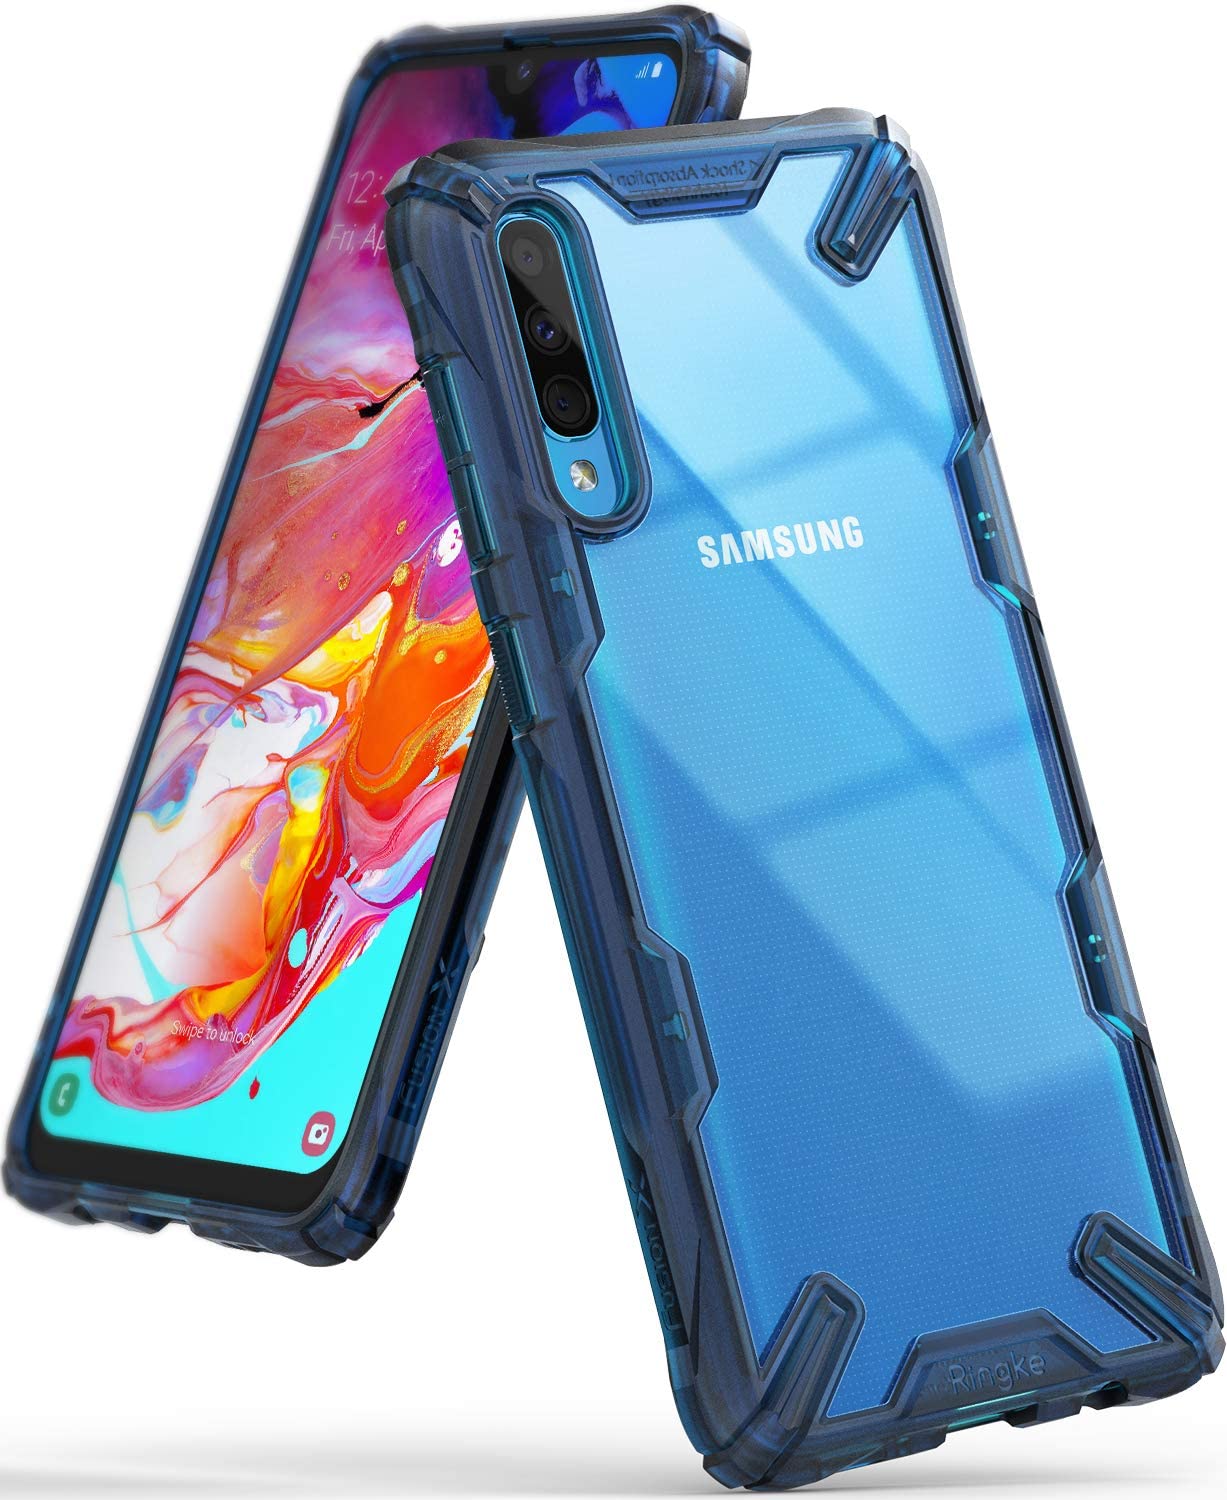 Ringke Fusion-X Designed for Galaxy A70 Case, Clear Rugged Military Grade Cover - Space Blue - e4cents